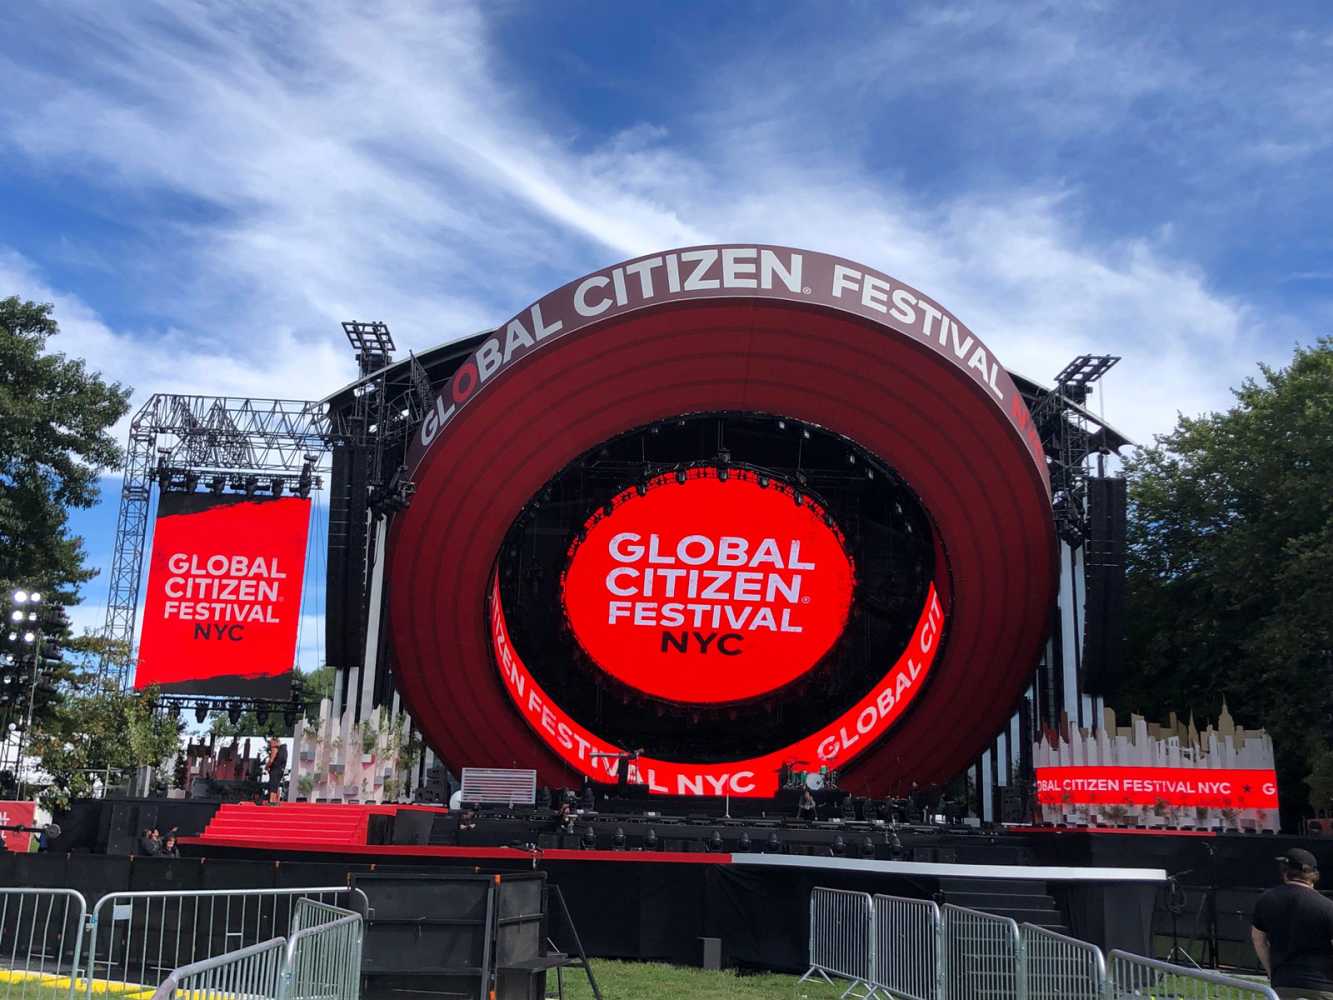 The US edition of GCF took place in Manhattan at Central Park’s Great Lawn